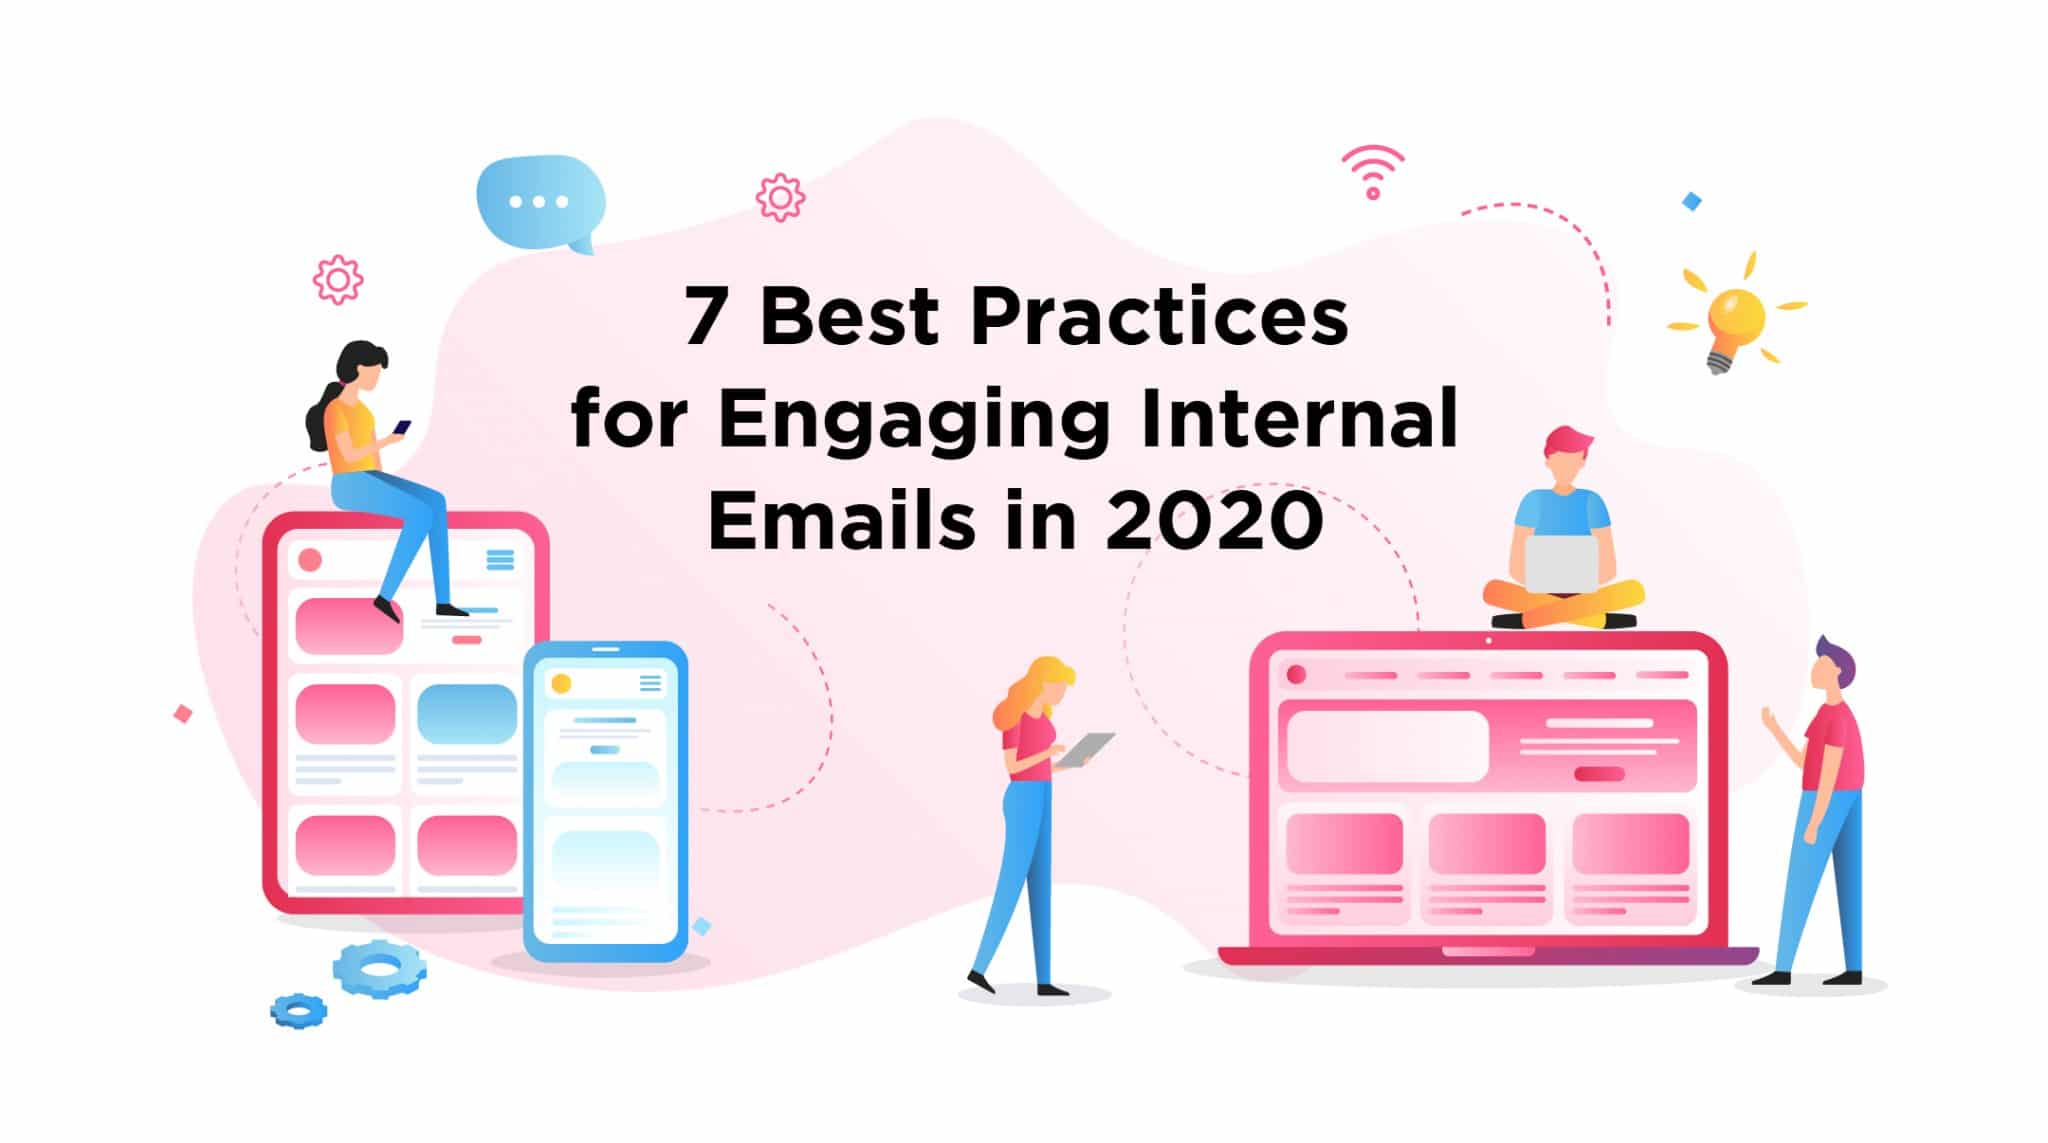 10 Internal Email Best Practices for 2023